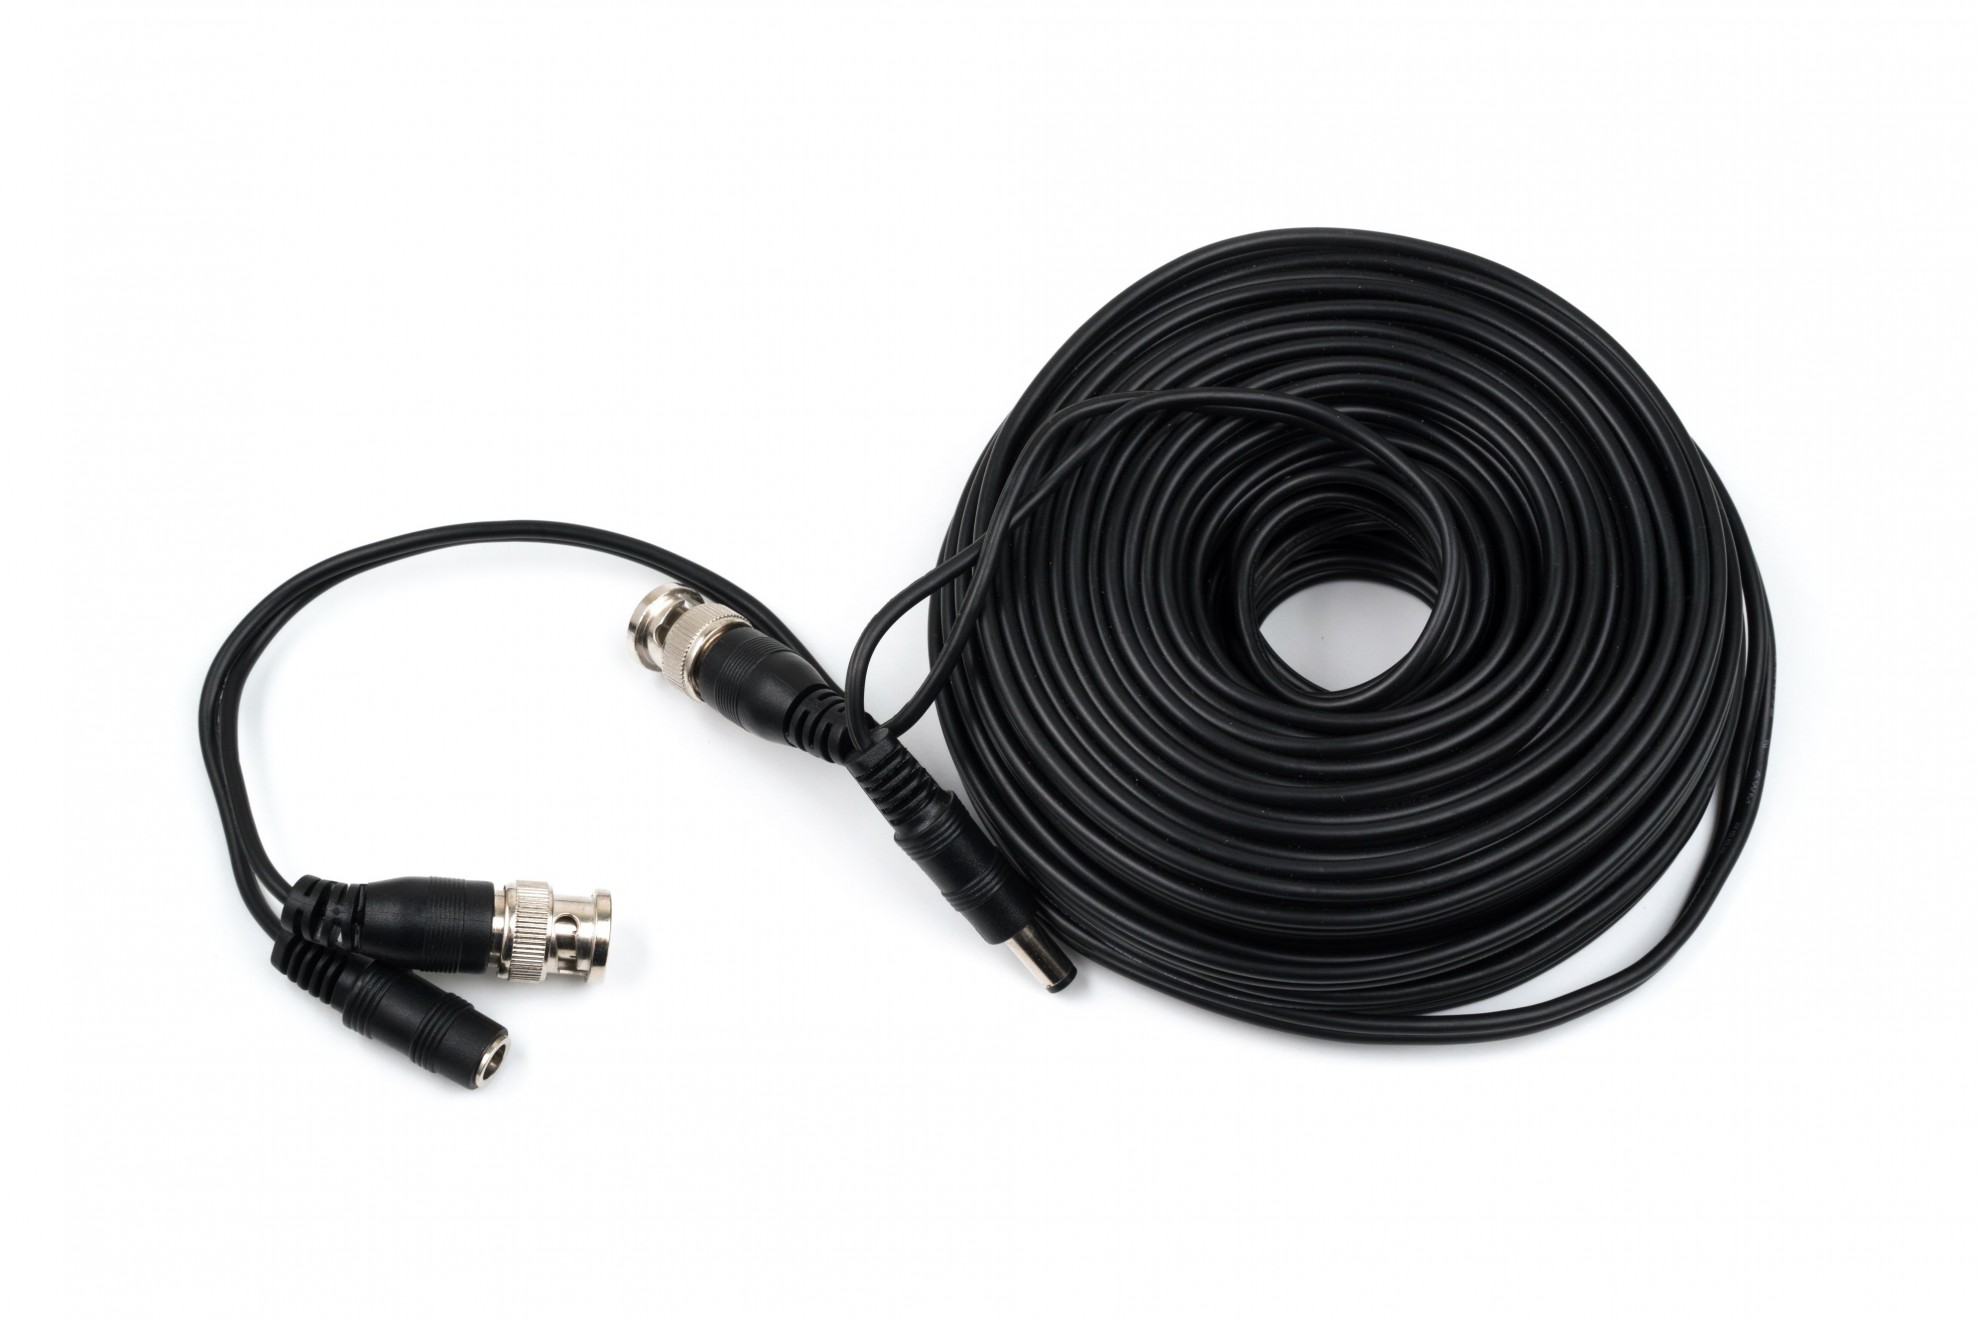 DC (F), BNC (M) to BNC (M), DC (M) Cable